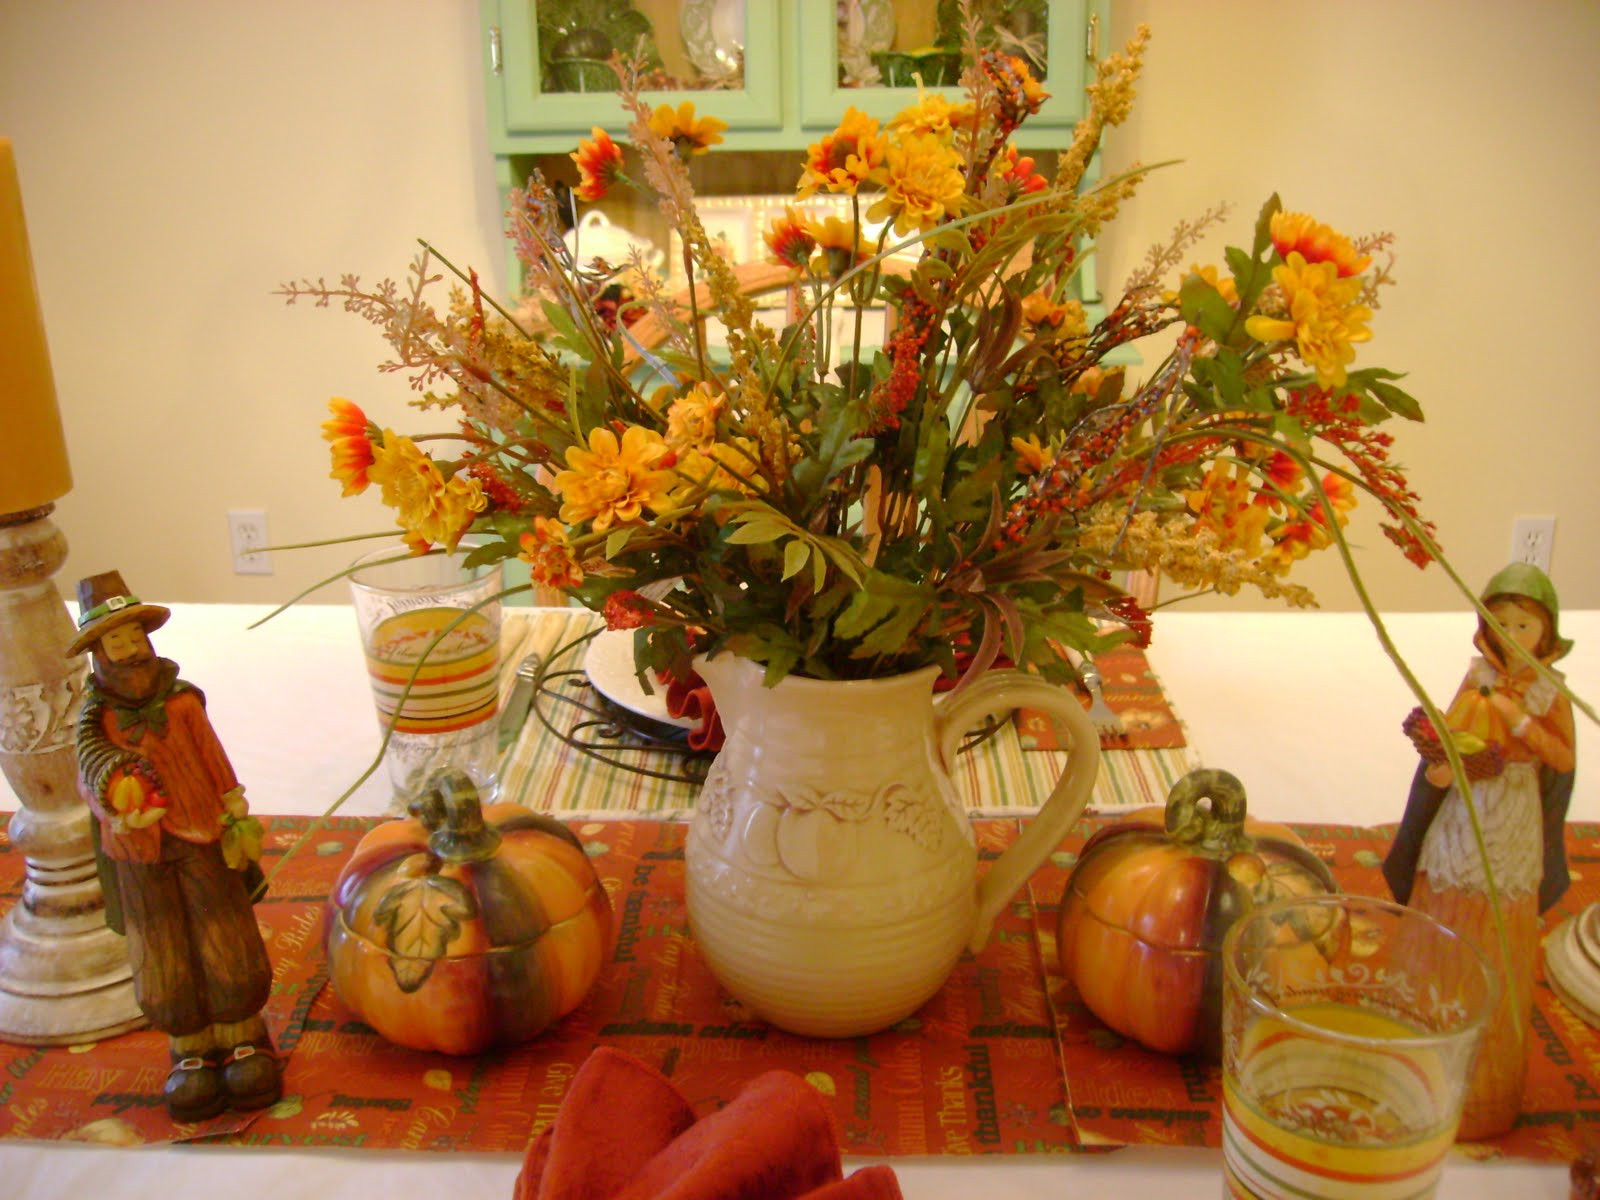 Turkey Centerpieces Thanksgiving
 The Sunny Side of the Sun Porch My Thanksgiving Table